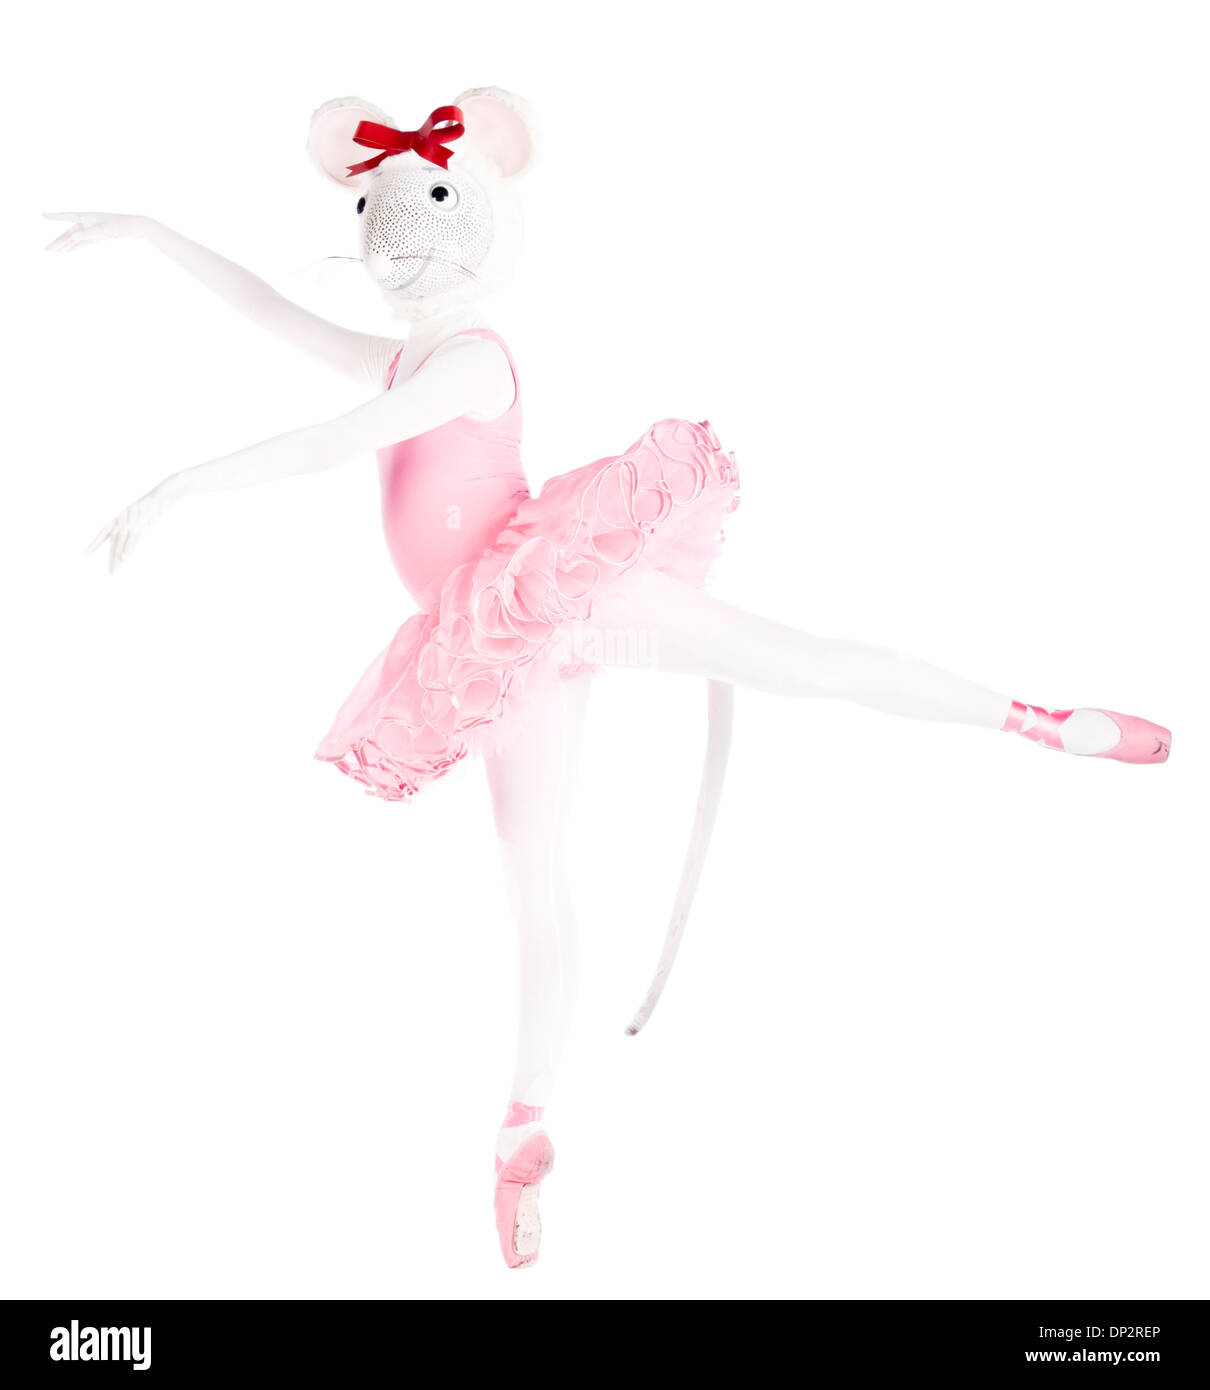 Angelina Ballerina en pointe looking into the camera photographed in the studio. Stock Photo